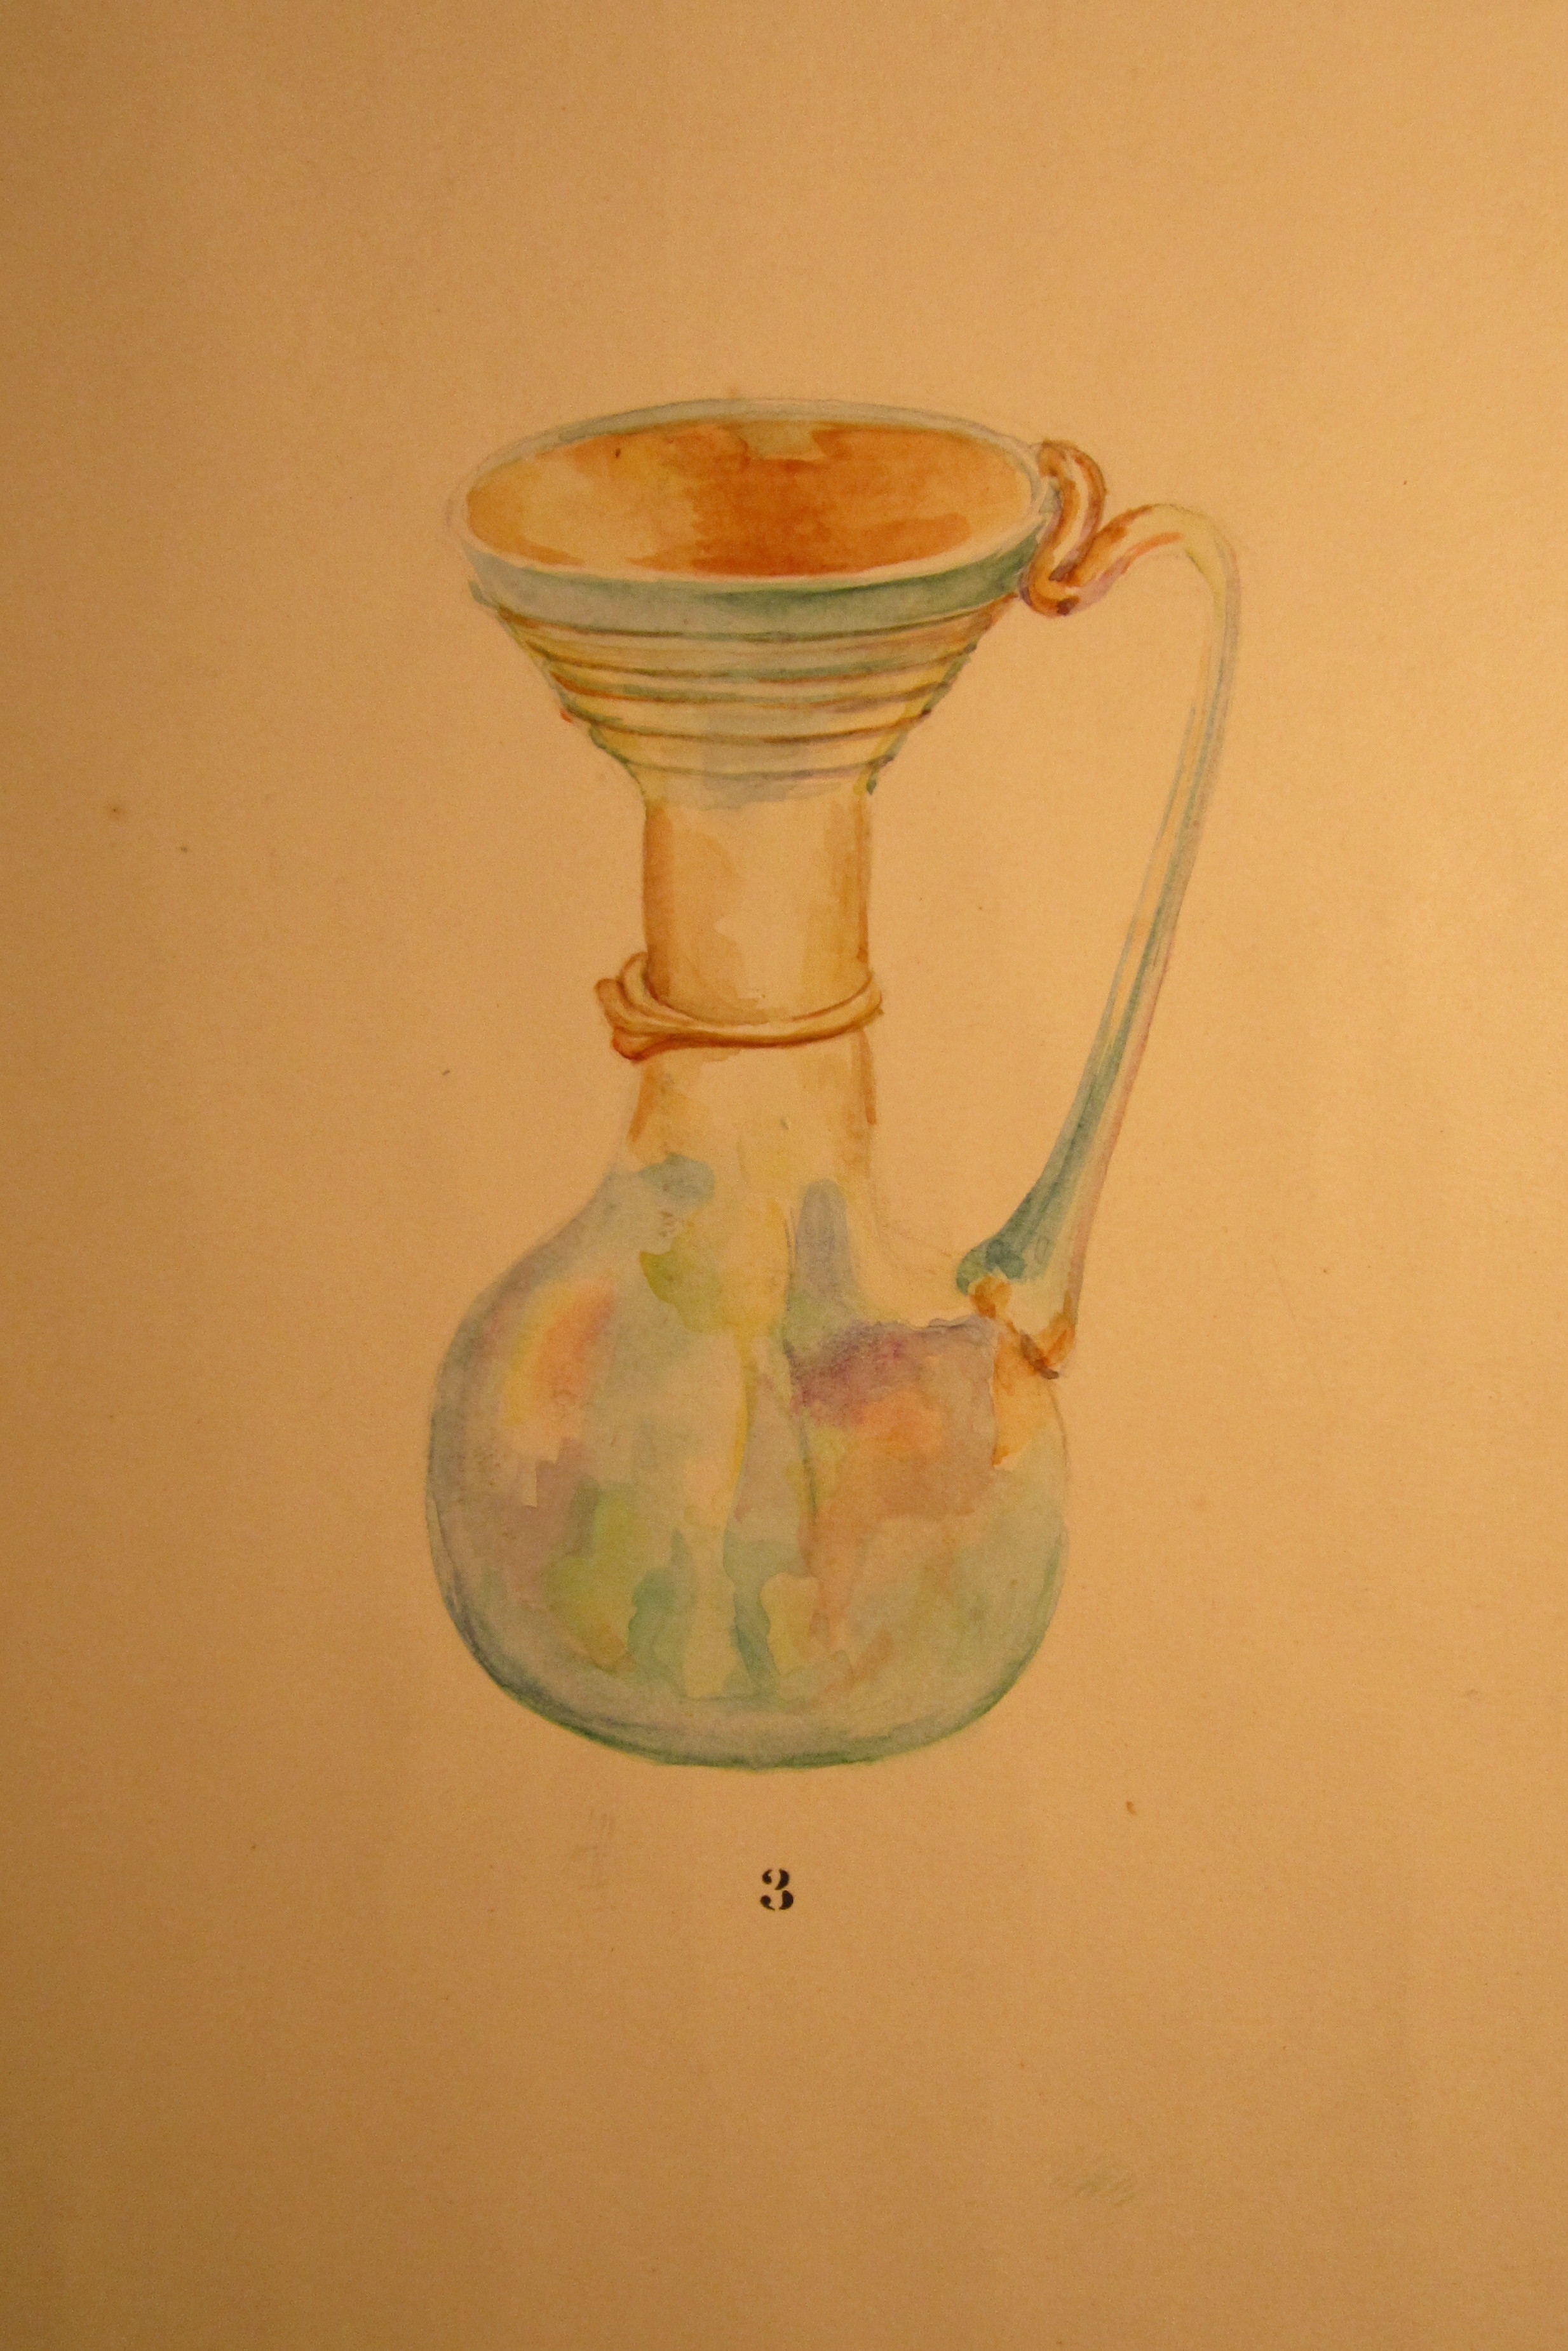 Watercolor of this jug, from the Rowe excavation watercolors.